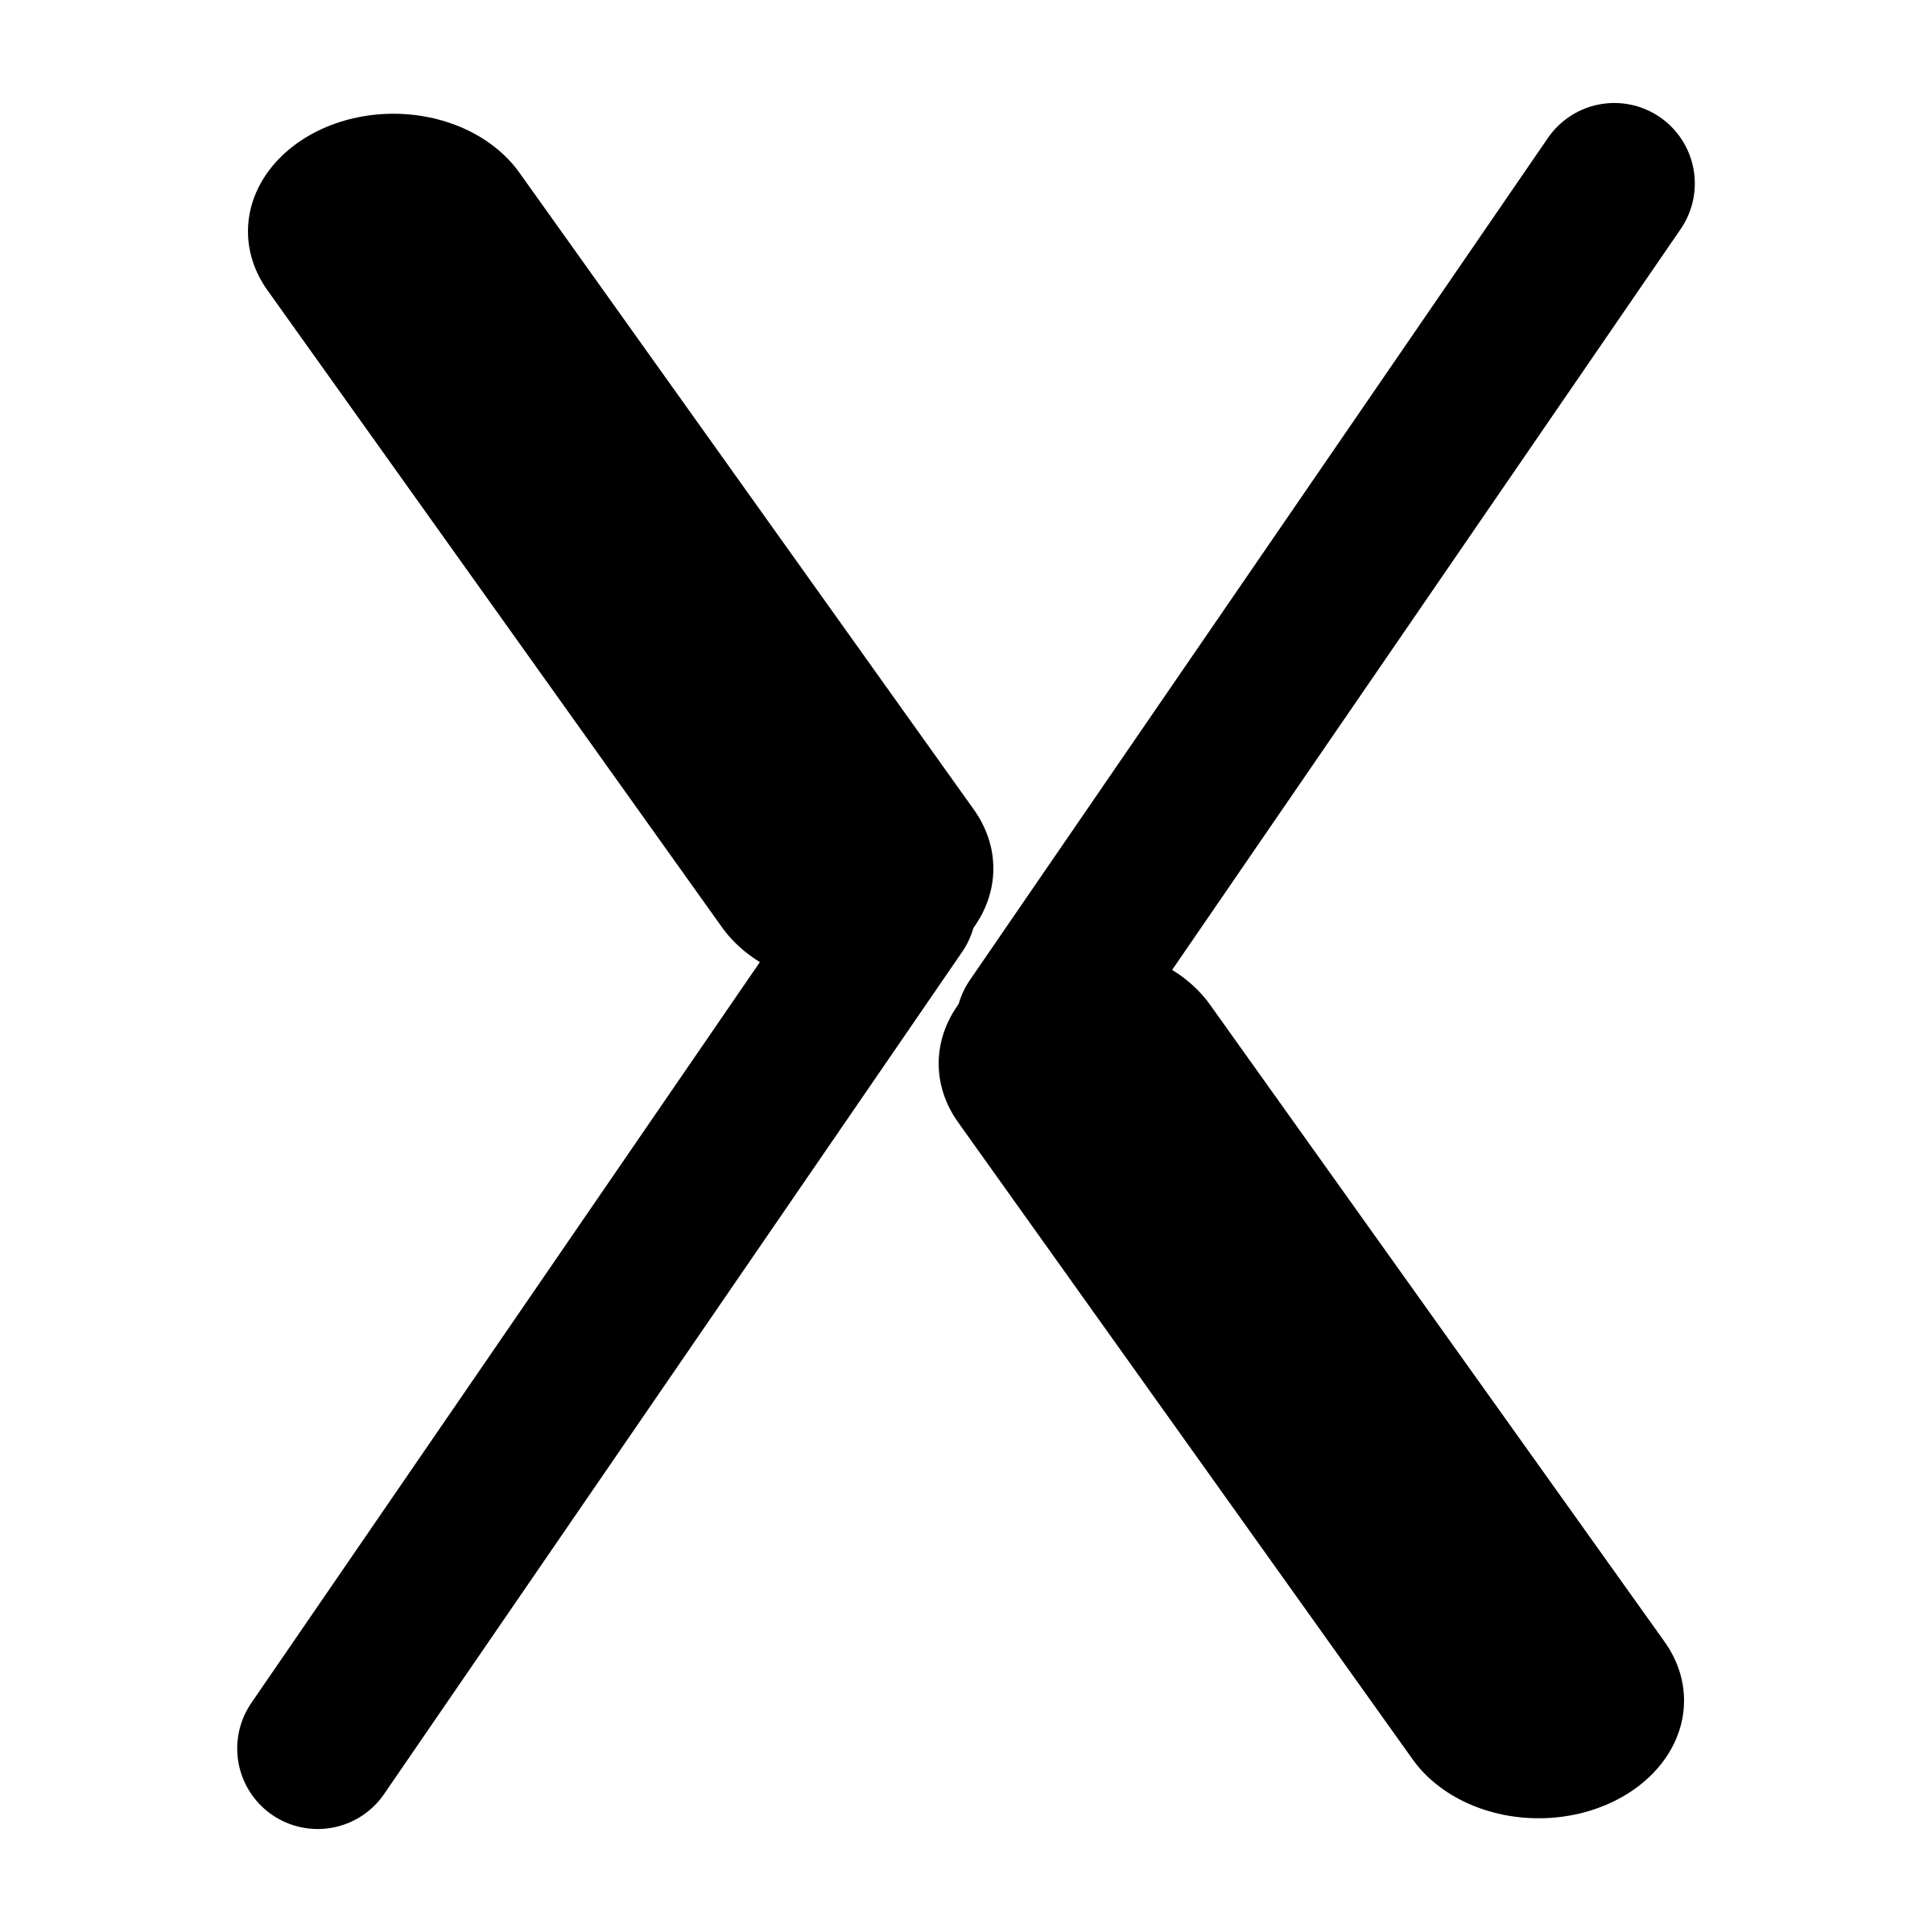 the letter x in black